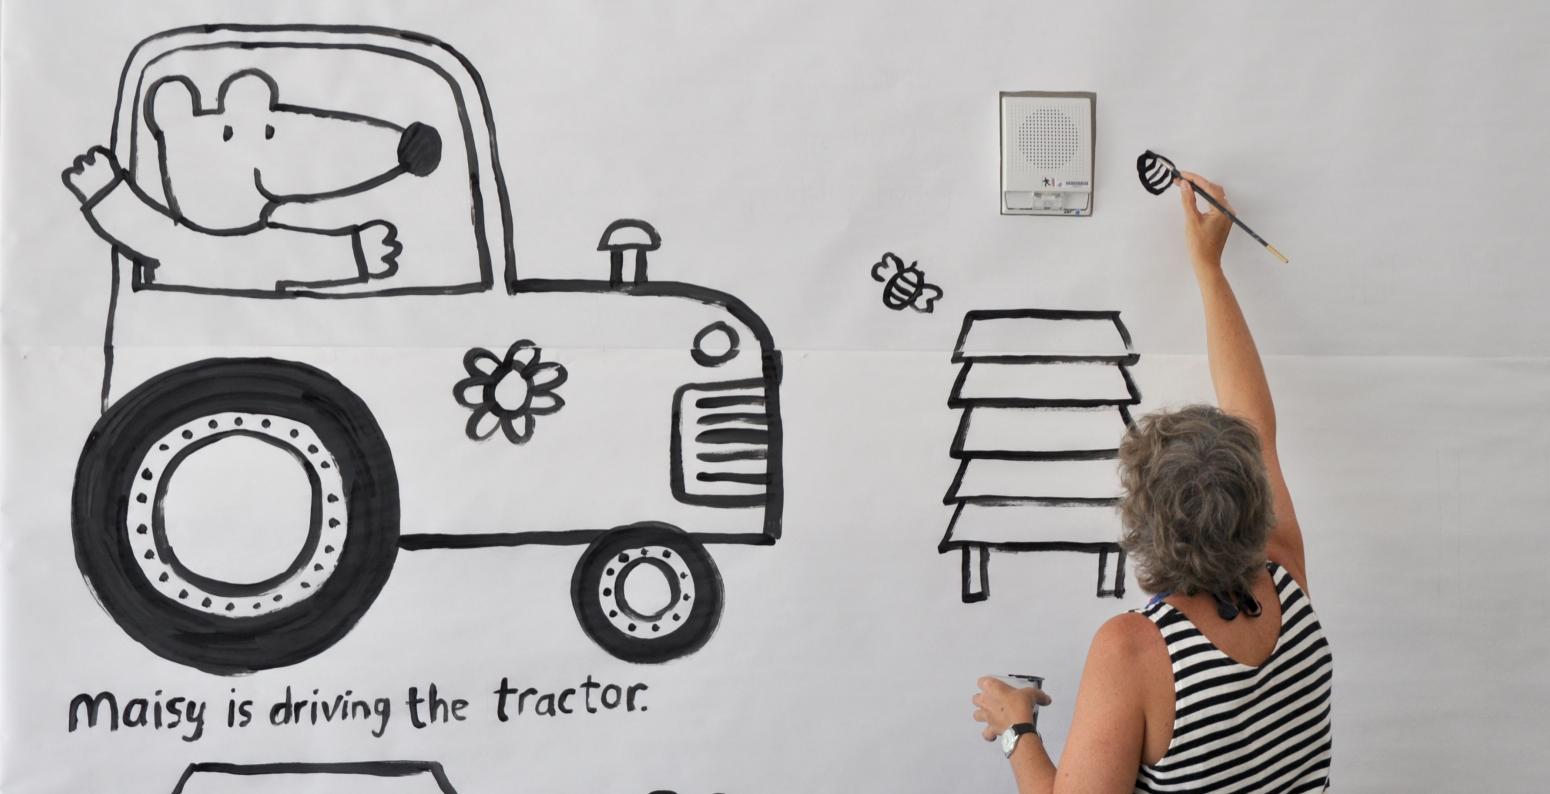 Author/illustrator Lucy Cousins painting a mural with black paint on a white wall.